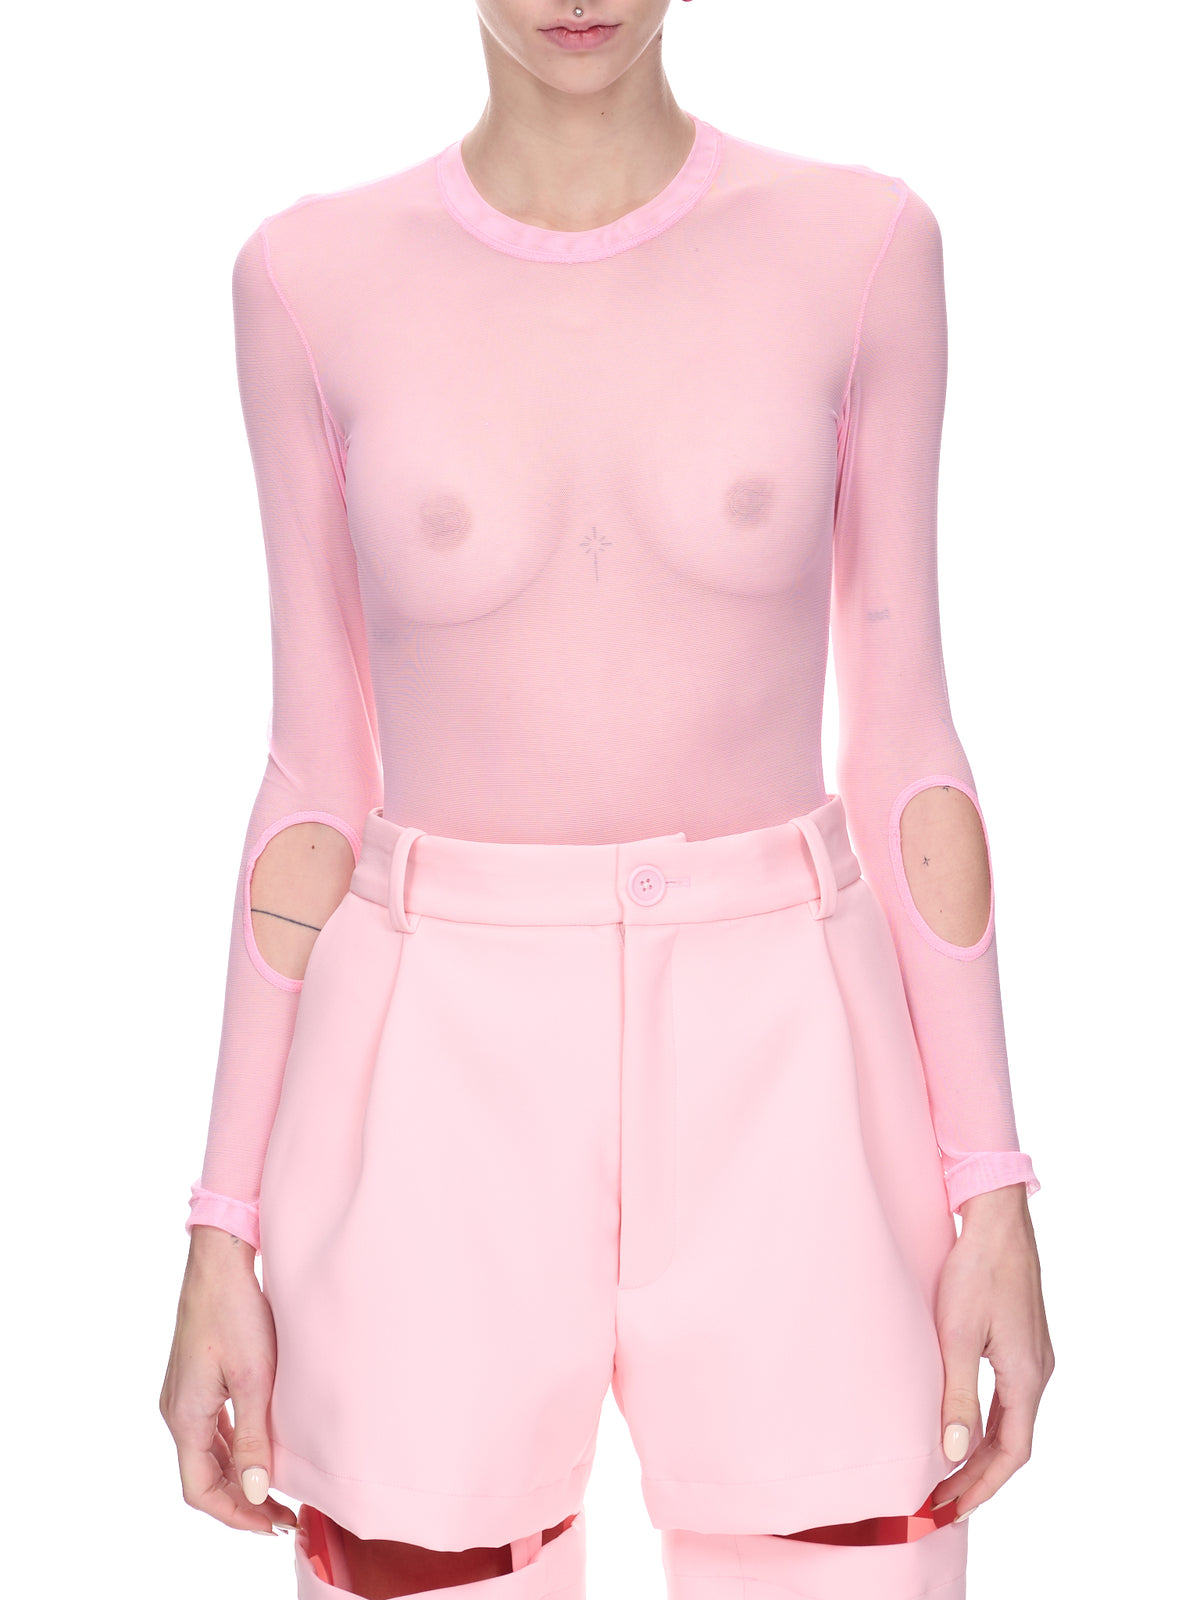 Mesh Cut-Out Top (MB-43-STRETCH-MESH-HOT-PINK)